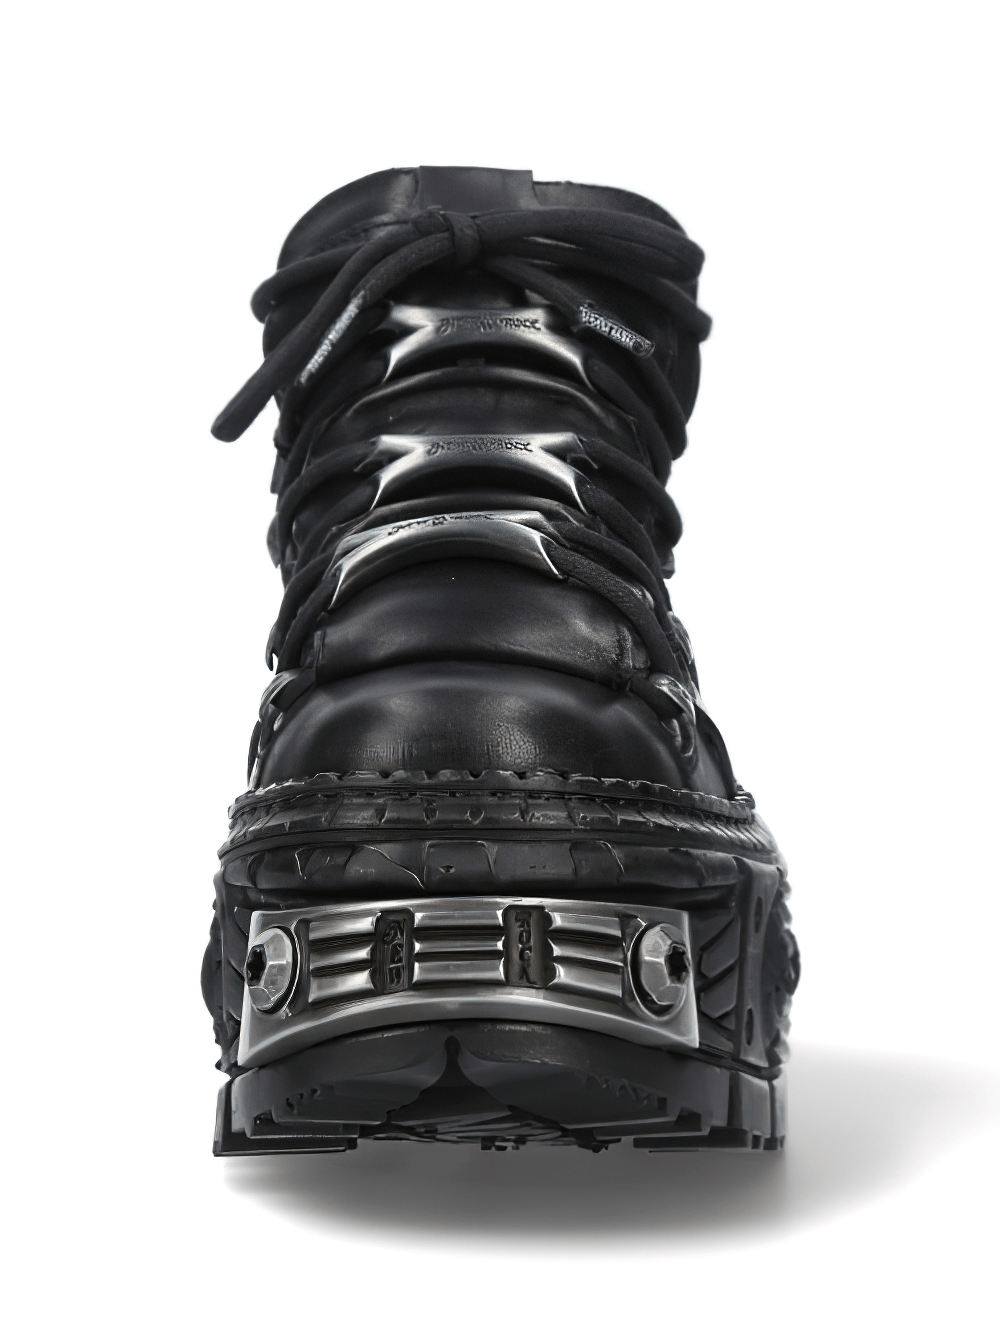 NEW ROCK Black Rocker Leather Shoes with Gothic Flair